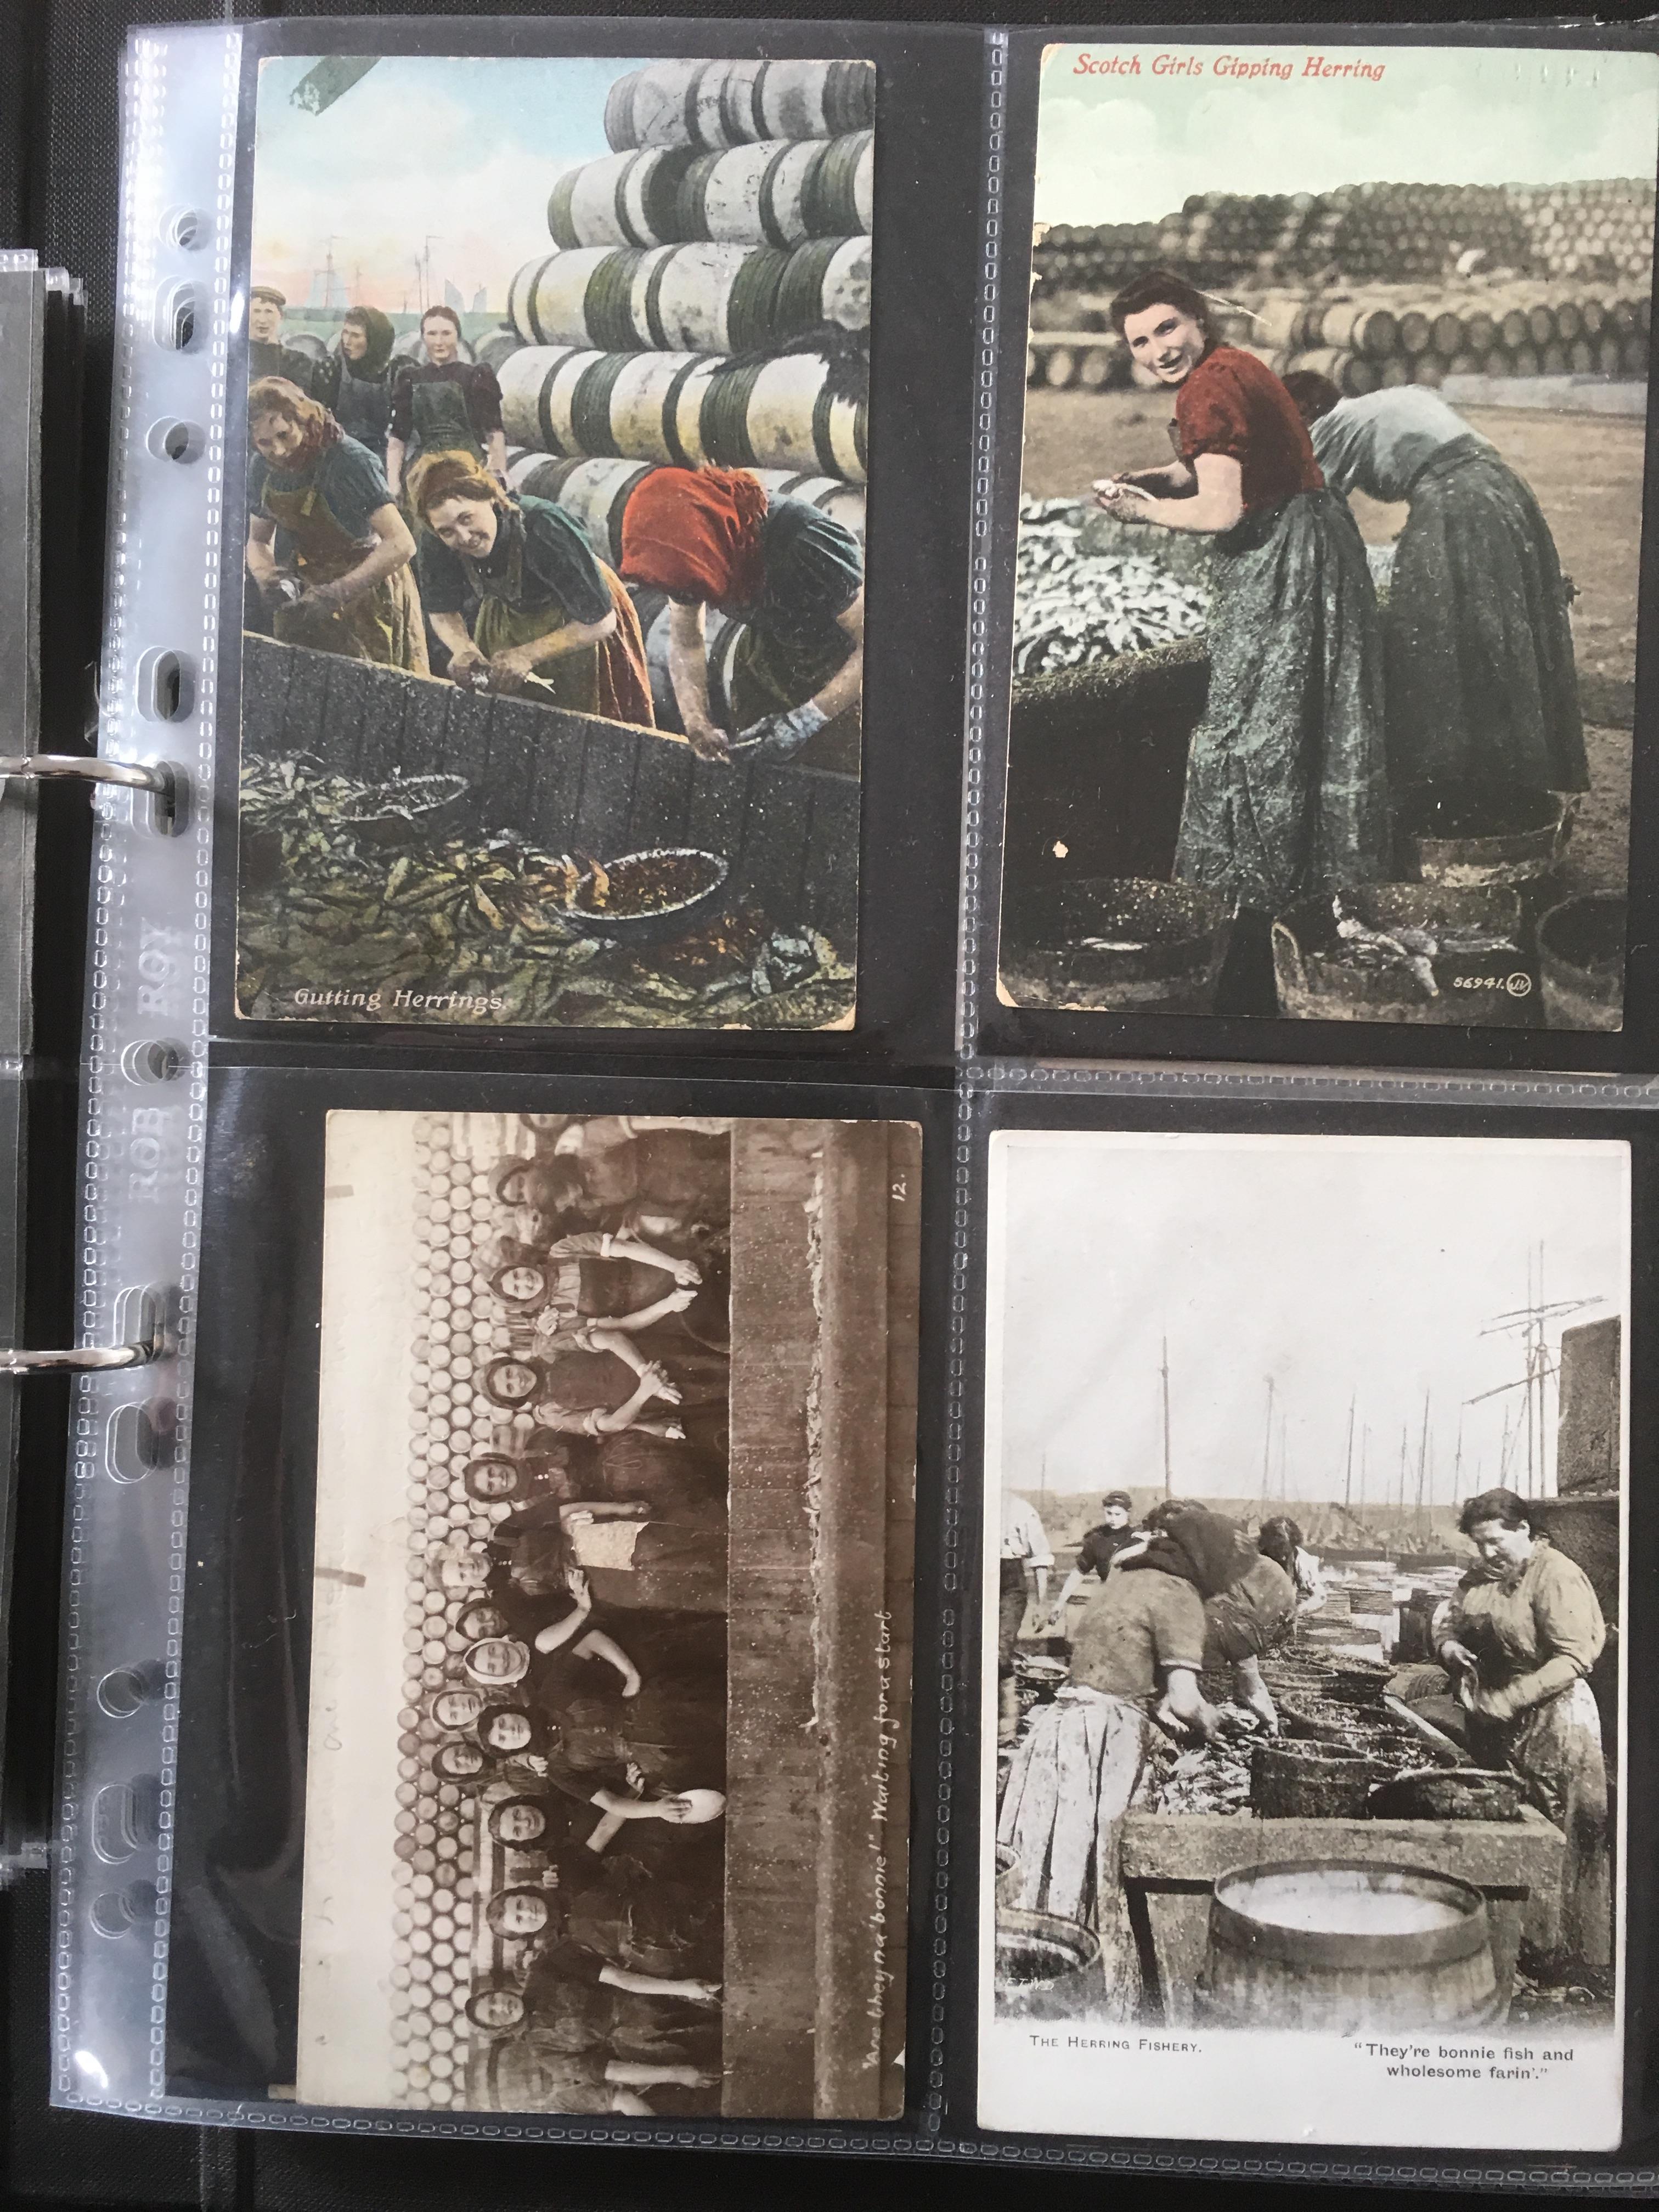 SUFFOLK: ALBUM WITH A COLLECTION OF LOWESTOFT FISHING INDUSTRY POSTCARDS, HARBOUR, DRIFTERS, - Image 4 of 9